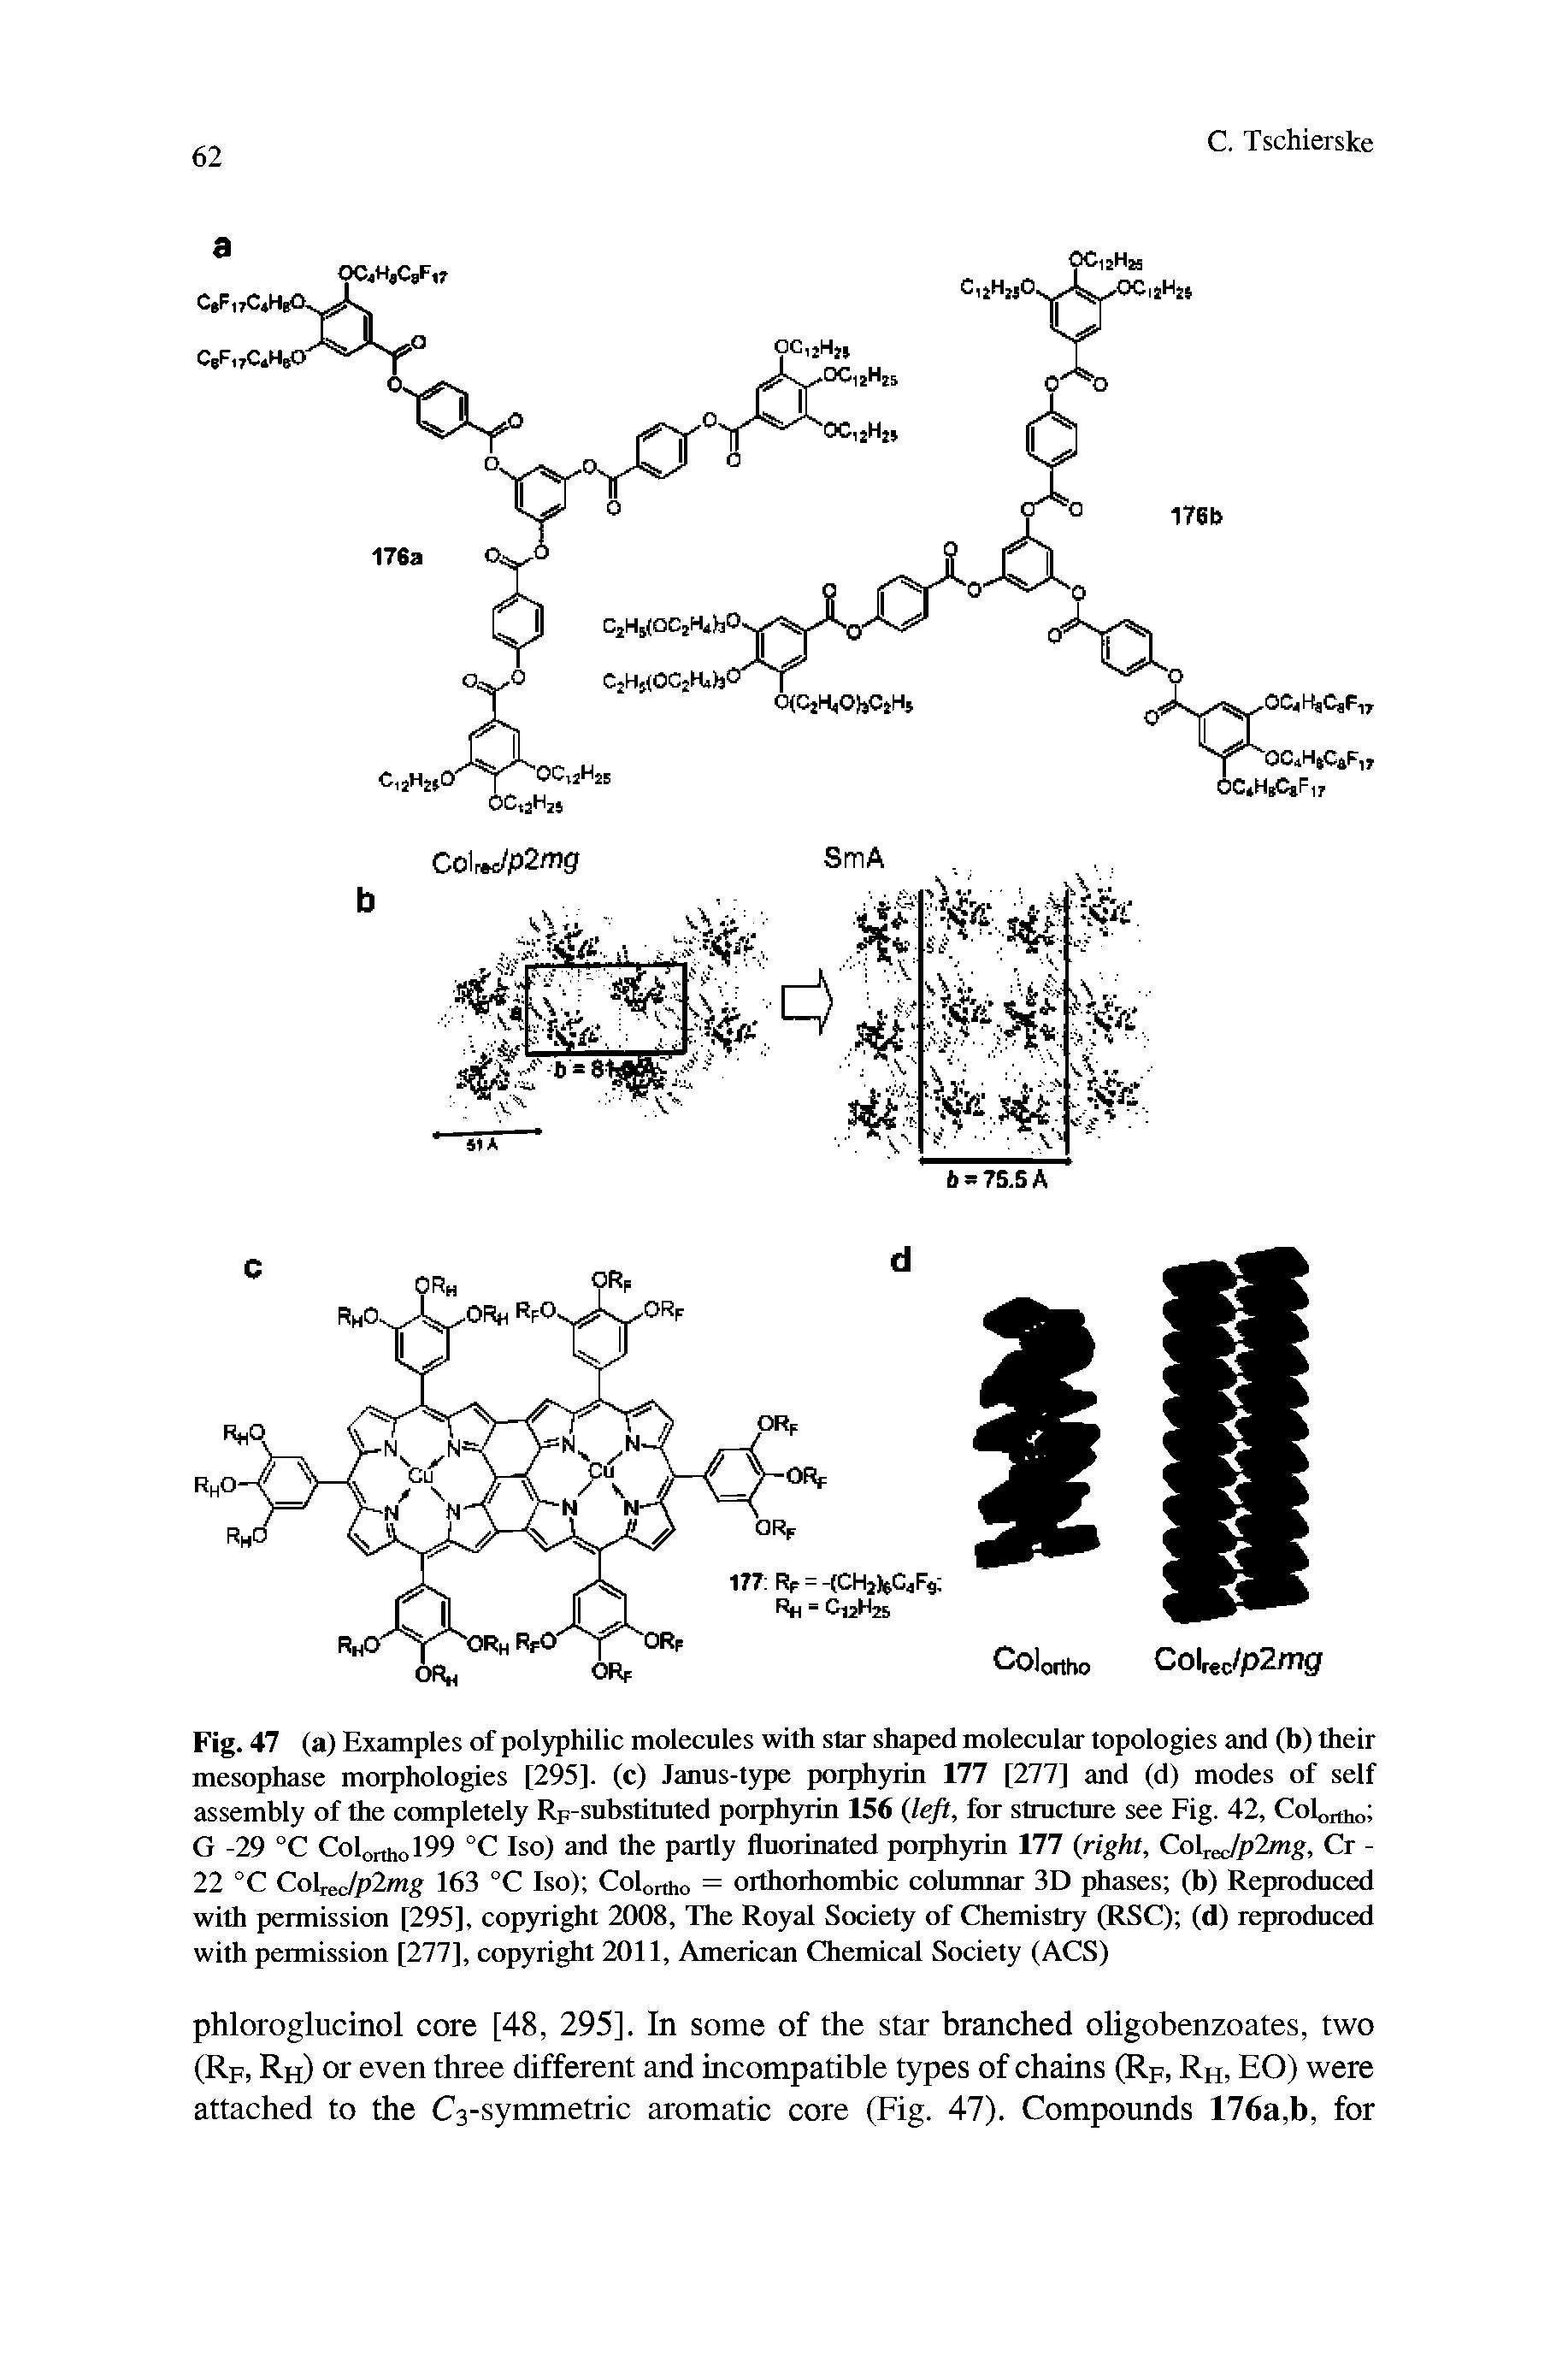 Fig. 47 (a) Examples of polyphilic molecules with star shaped molecular topologies and (b) their mesophase morphologies [295]. (c) Janus-type porphyrin 177 [277] and (d) modes of self assembly of the completely RF-substituted porphyrin 156 left, for structure see Fig. 42, Colortho G -29 °C Colortho199 °C Iso) and the partly fluorinated porphyrin 177 right, ColTeJp2mg, Cr -22 °C Co n,Jp2mg 163 °C Iso) Colortho = orthorhombic columnar 3D phases (b) Reproduced with permission [295], copyright 2008, The Royal Society of Chemistry (RSC) (d) reproduced with permission [277], copyright 2011, American Chemical Society (ACS)...